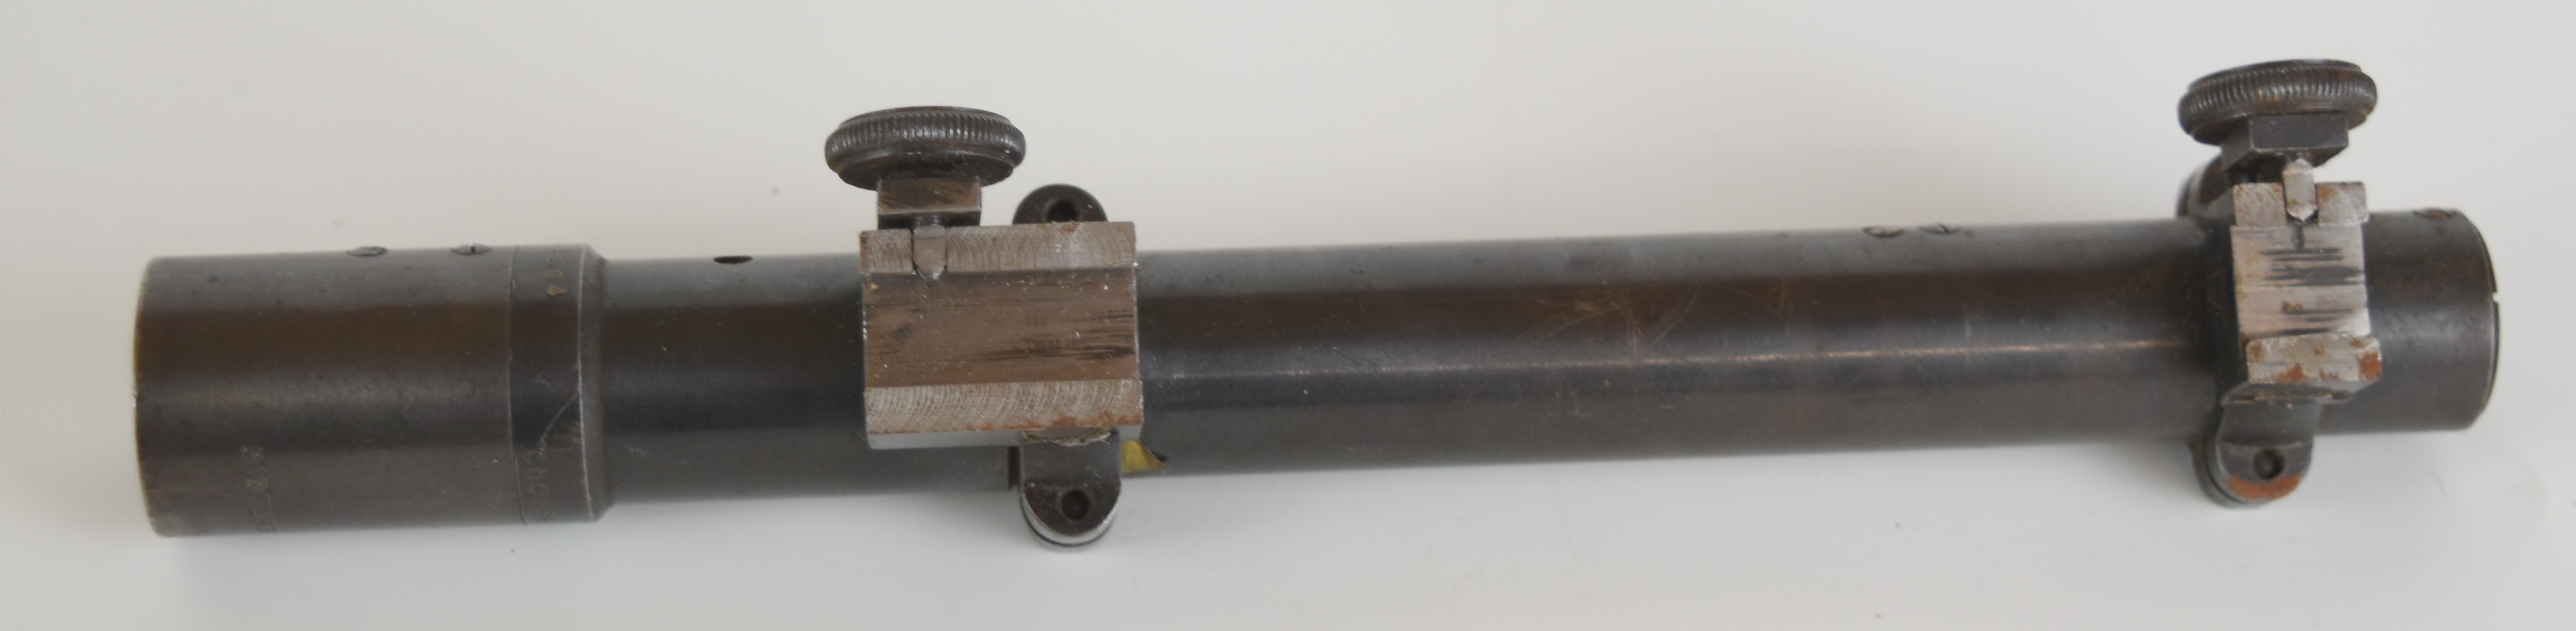 WW2 MHR Co M45 sniper rifle scope marked 'Telescope M45 No 1294 M.H.R. Co 1943 - RJD' with Parker- - Image 2 of 3